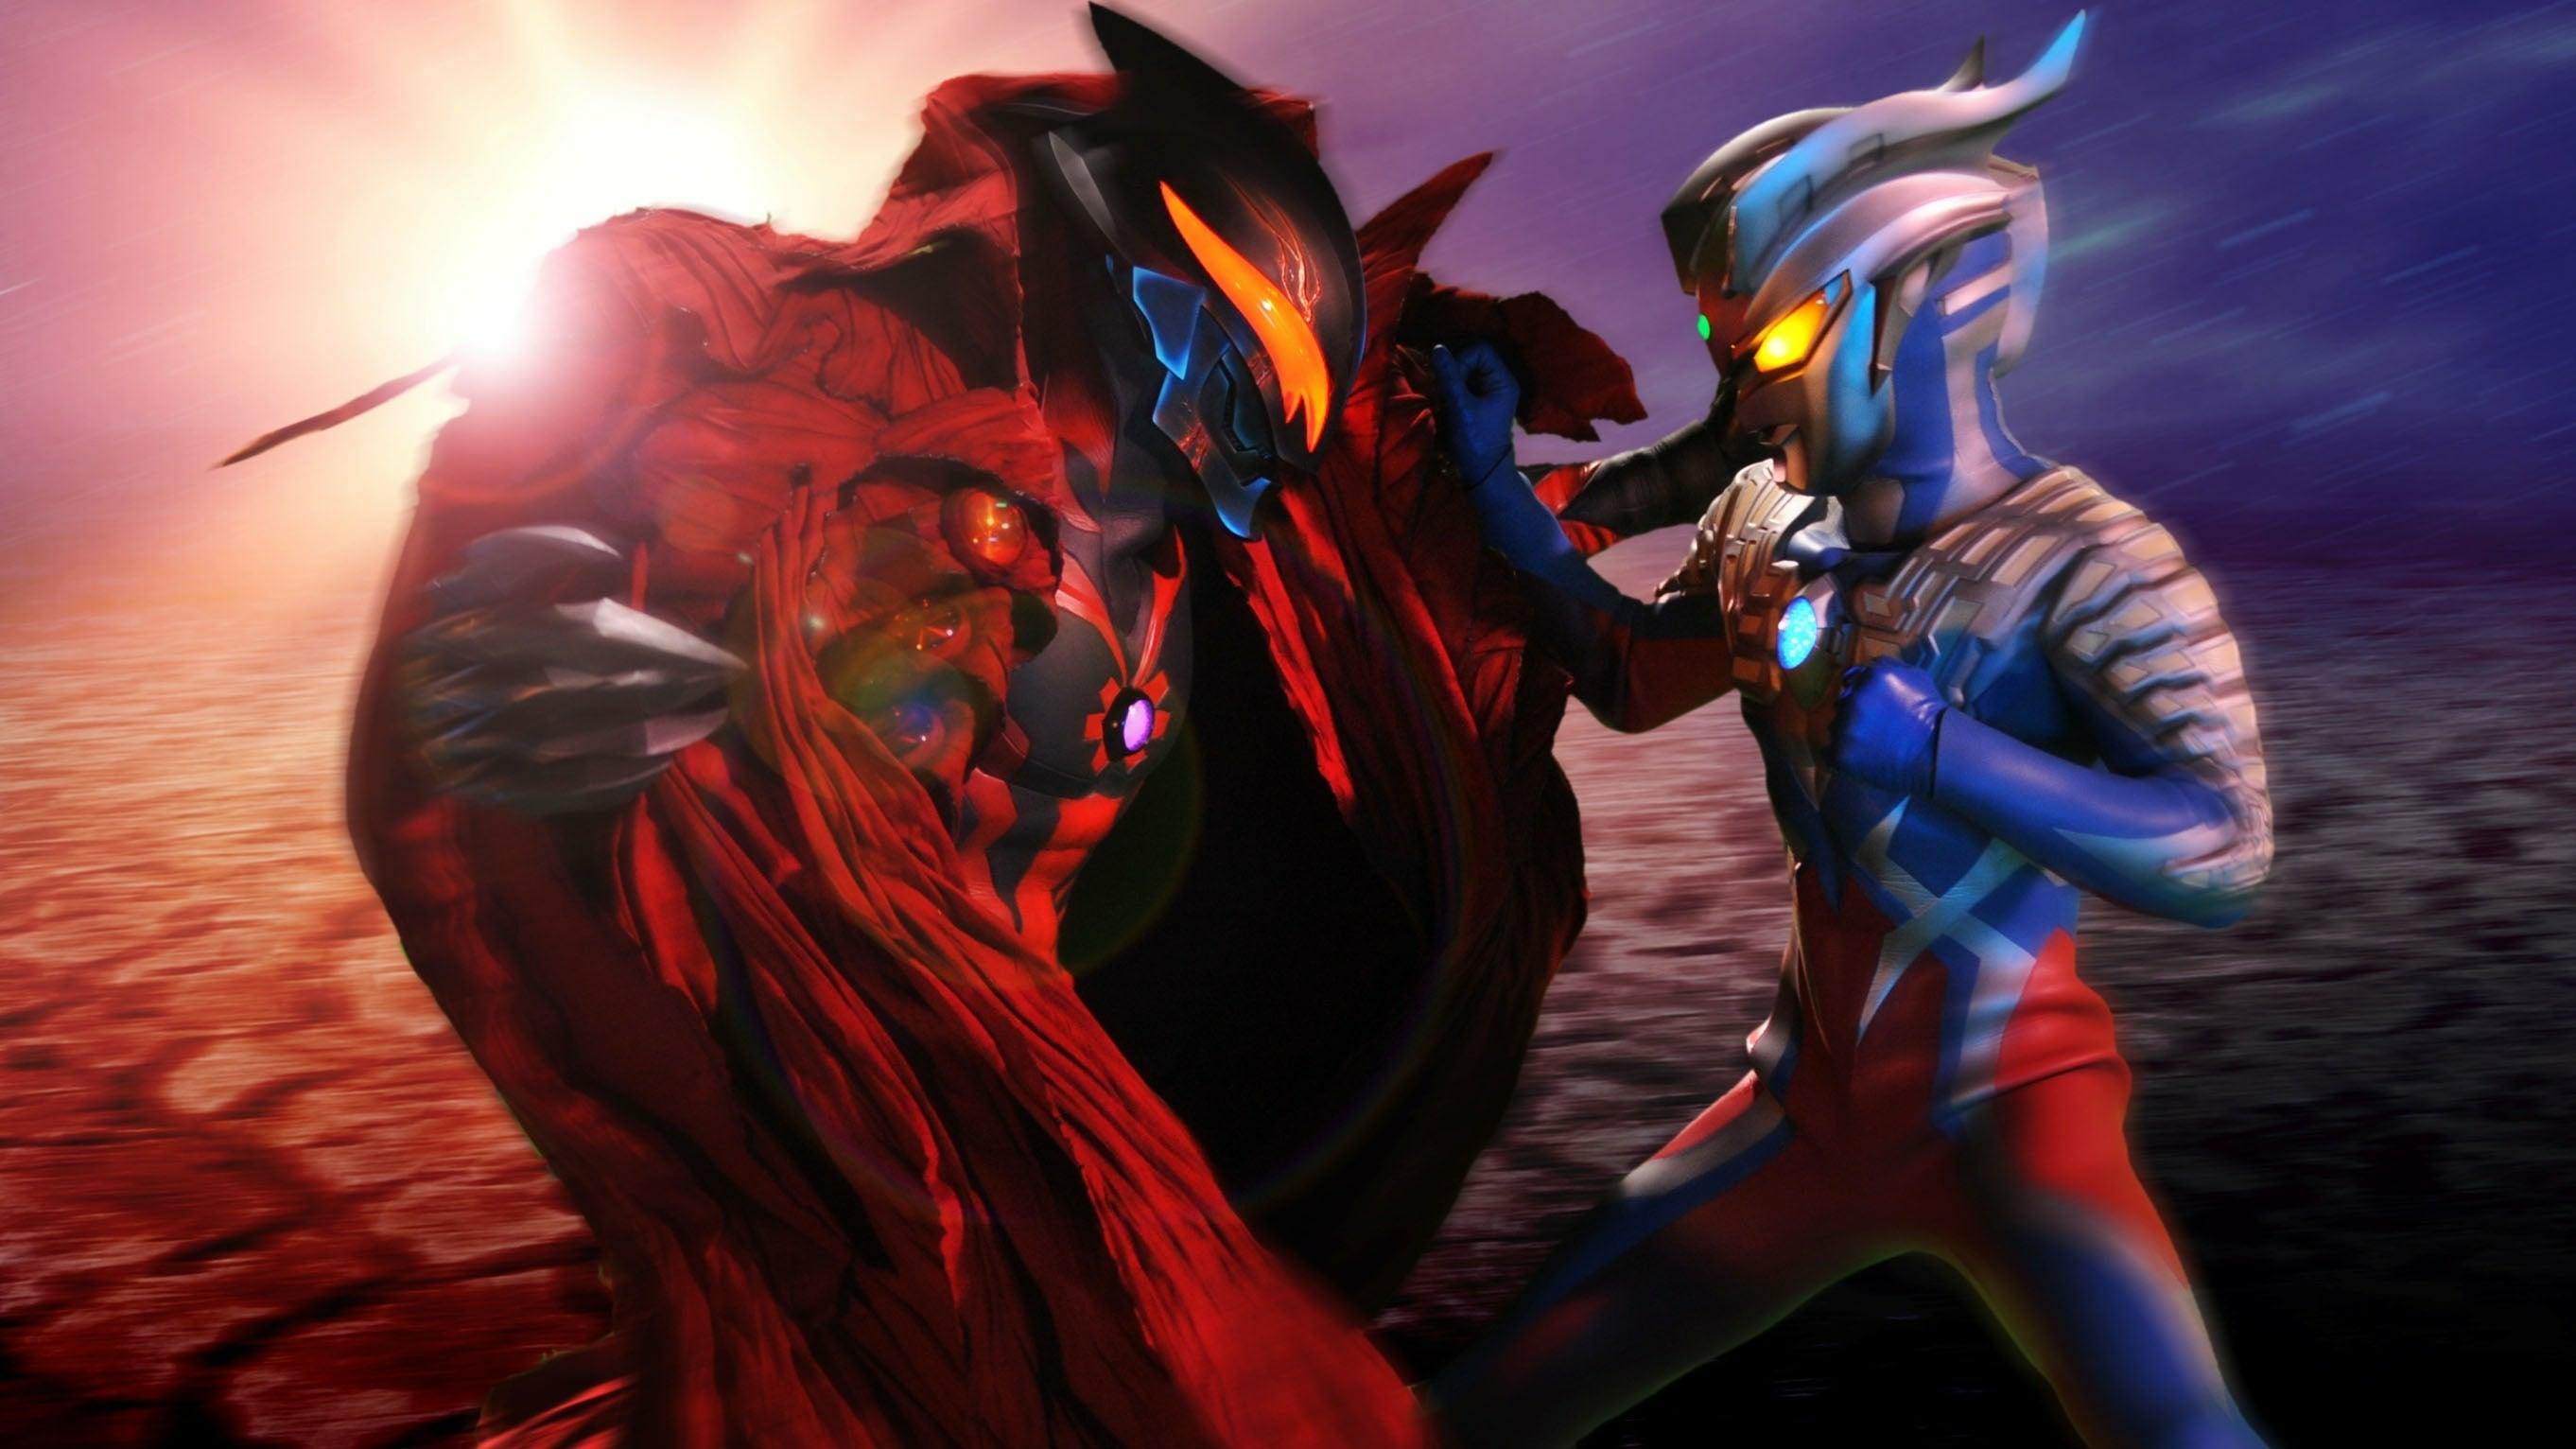 About HD Wallpapers For Ultraman Zero Fans Google Play version    Apptopia